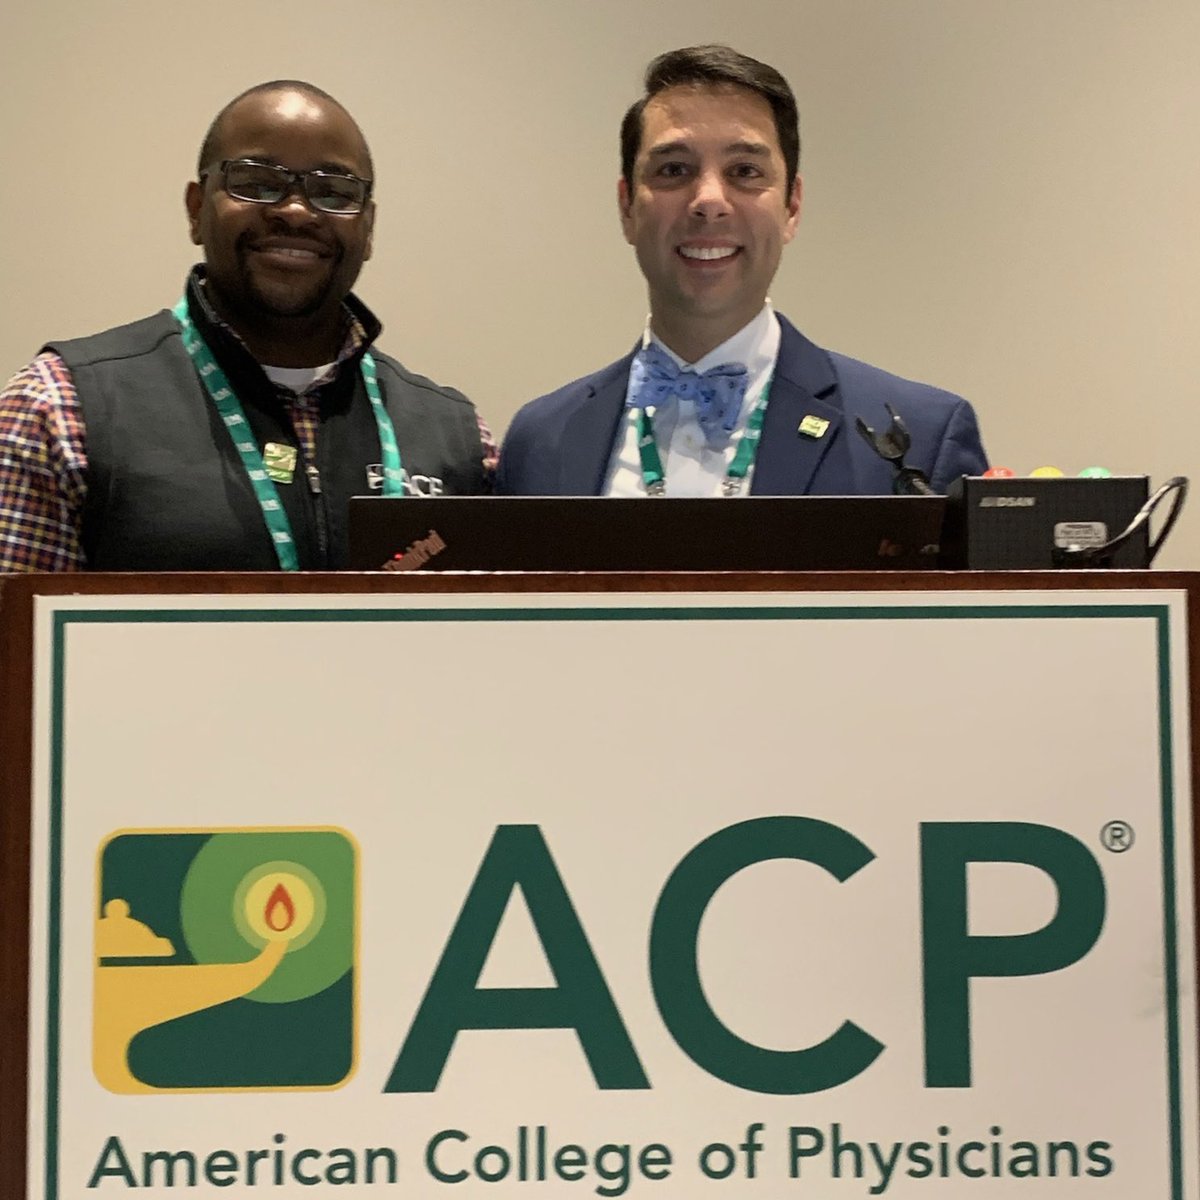 Proud to announce our work was recognized by @ACPinternists as one of 10 top research abstracts at #ACP2022. 4,000 applied! Thankful for the recognition and appreciative for such a great team! 

#ACPResFel #Research #PhysicianScientist #IM2022